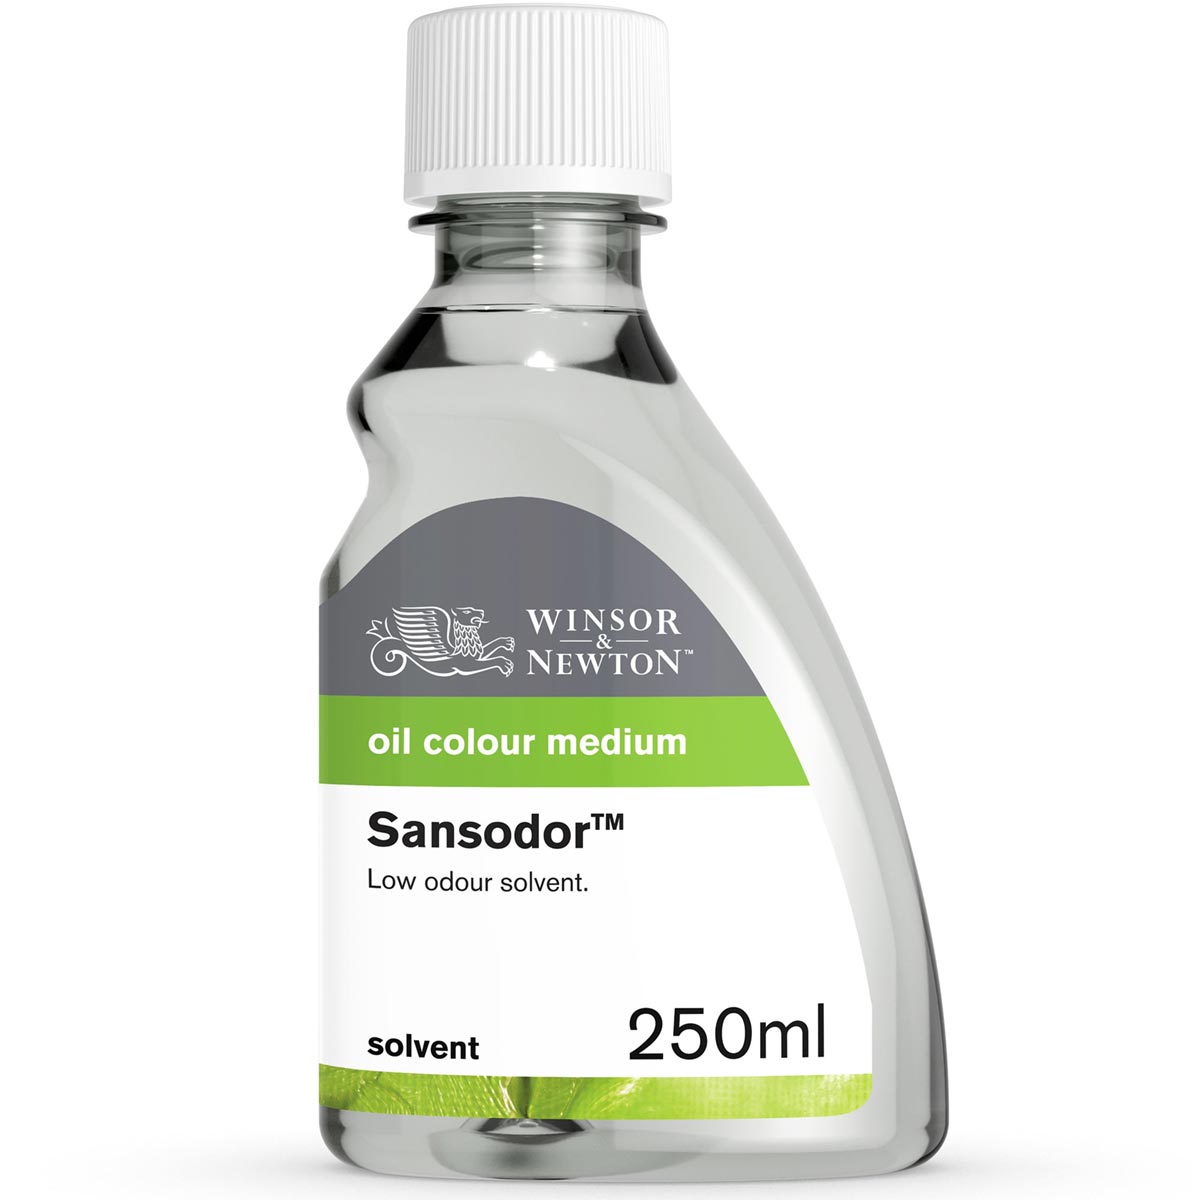 Winsor and Newton - Sansodor Low Odour Solvent Cleaner - 250ml